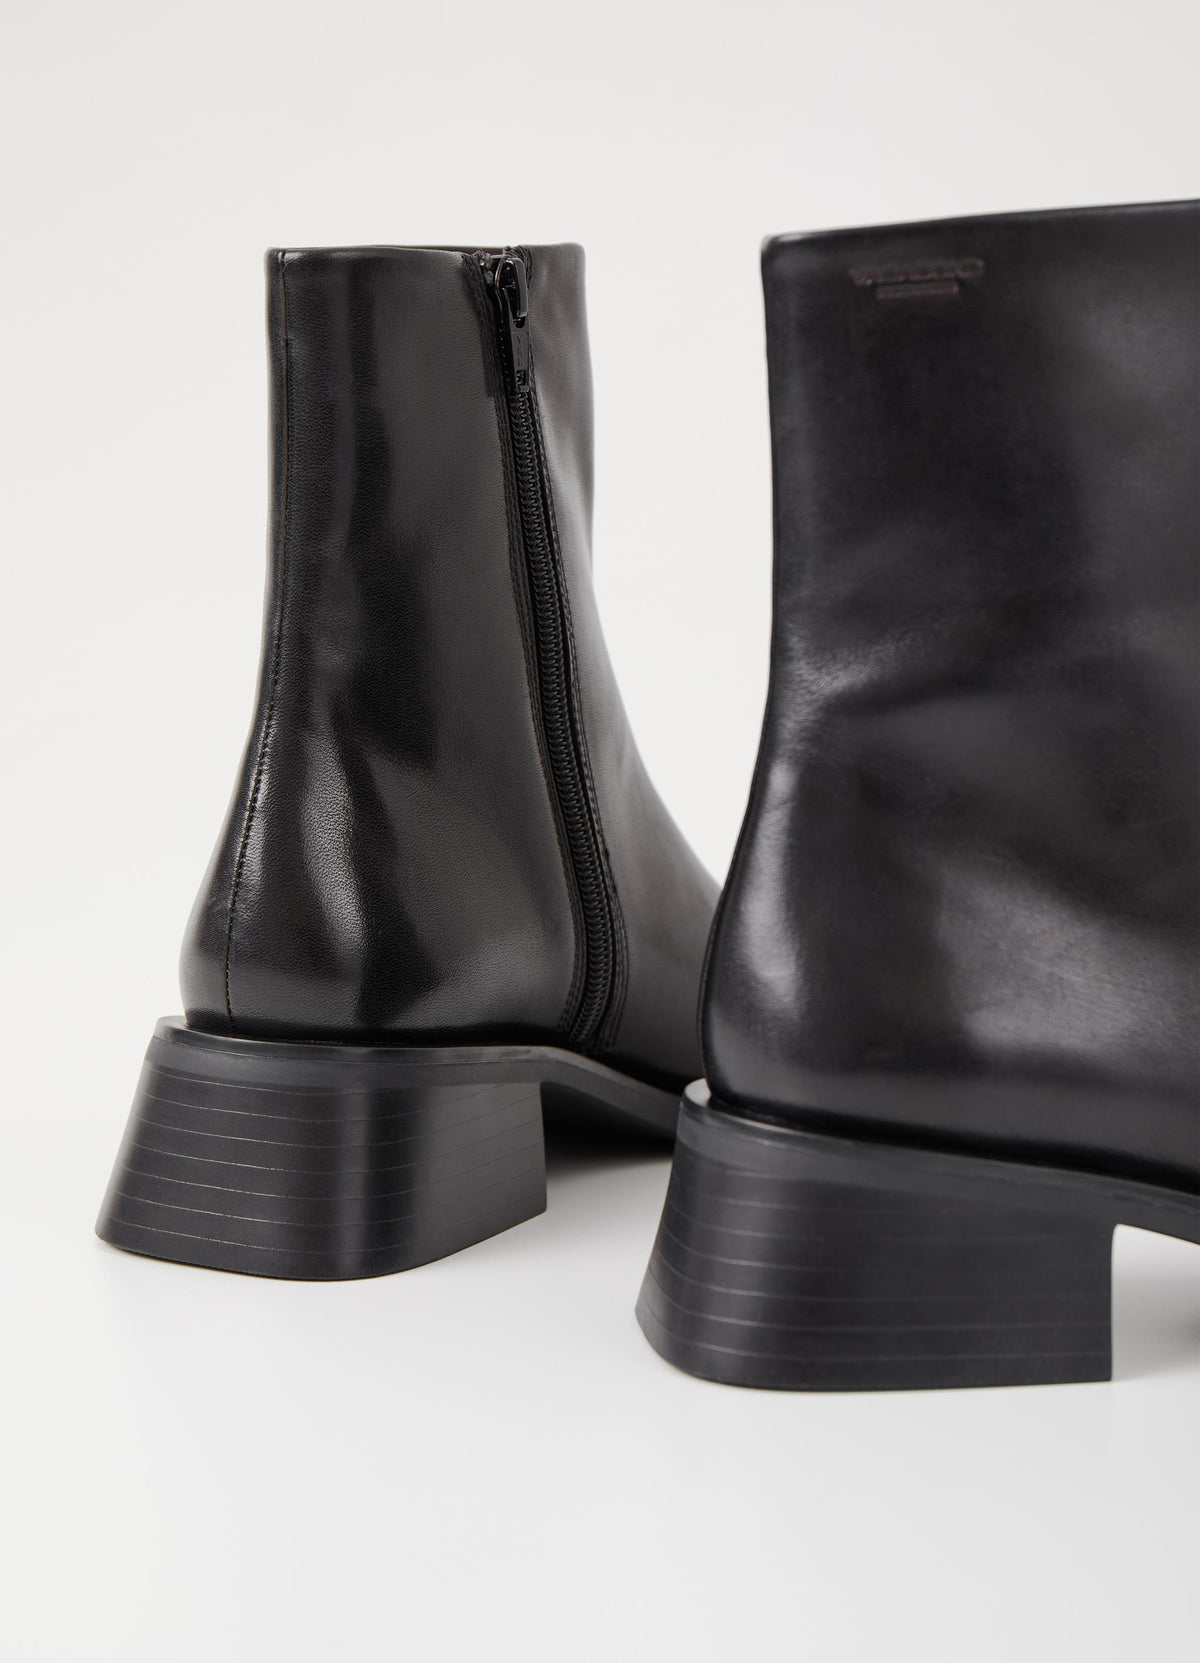 Black short leather boot with flared block stacked heel